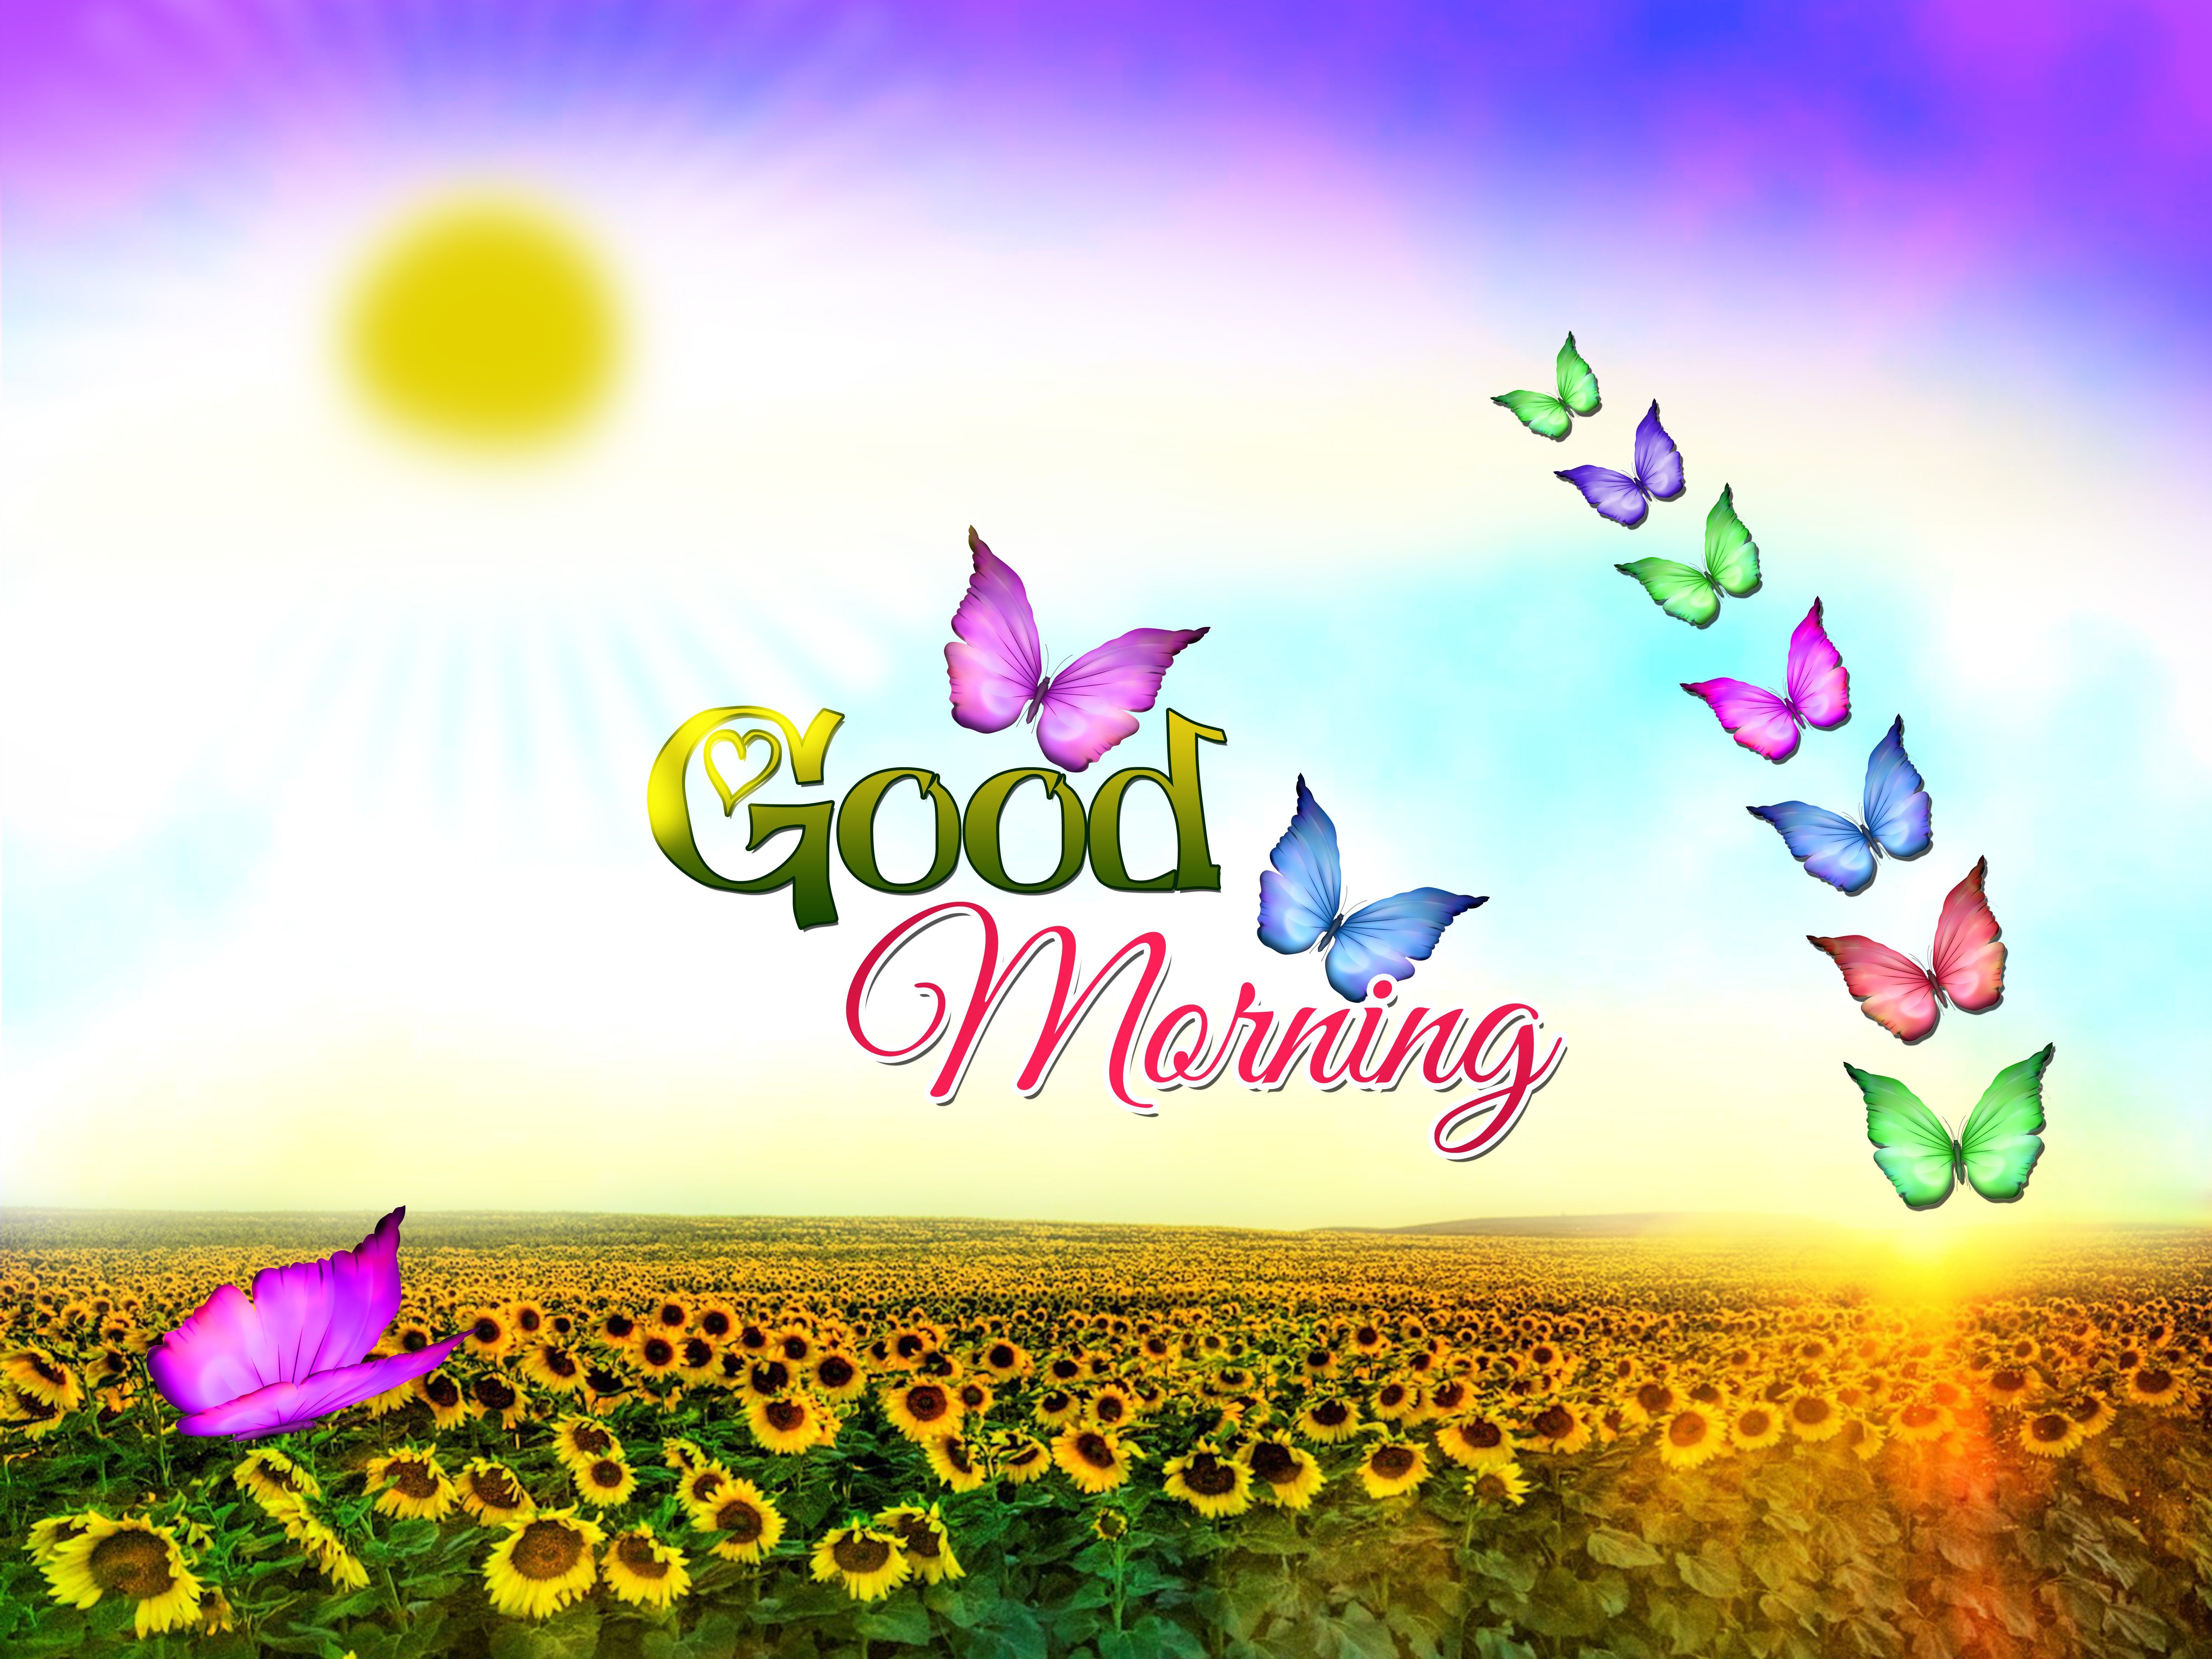 Best Good Morning Images Pics  Good Morning Images  Good Morning Wallpaper   Good Morning Pics HD